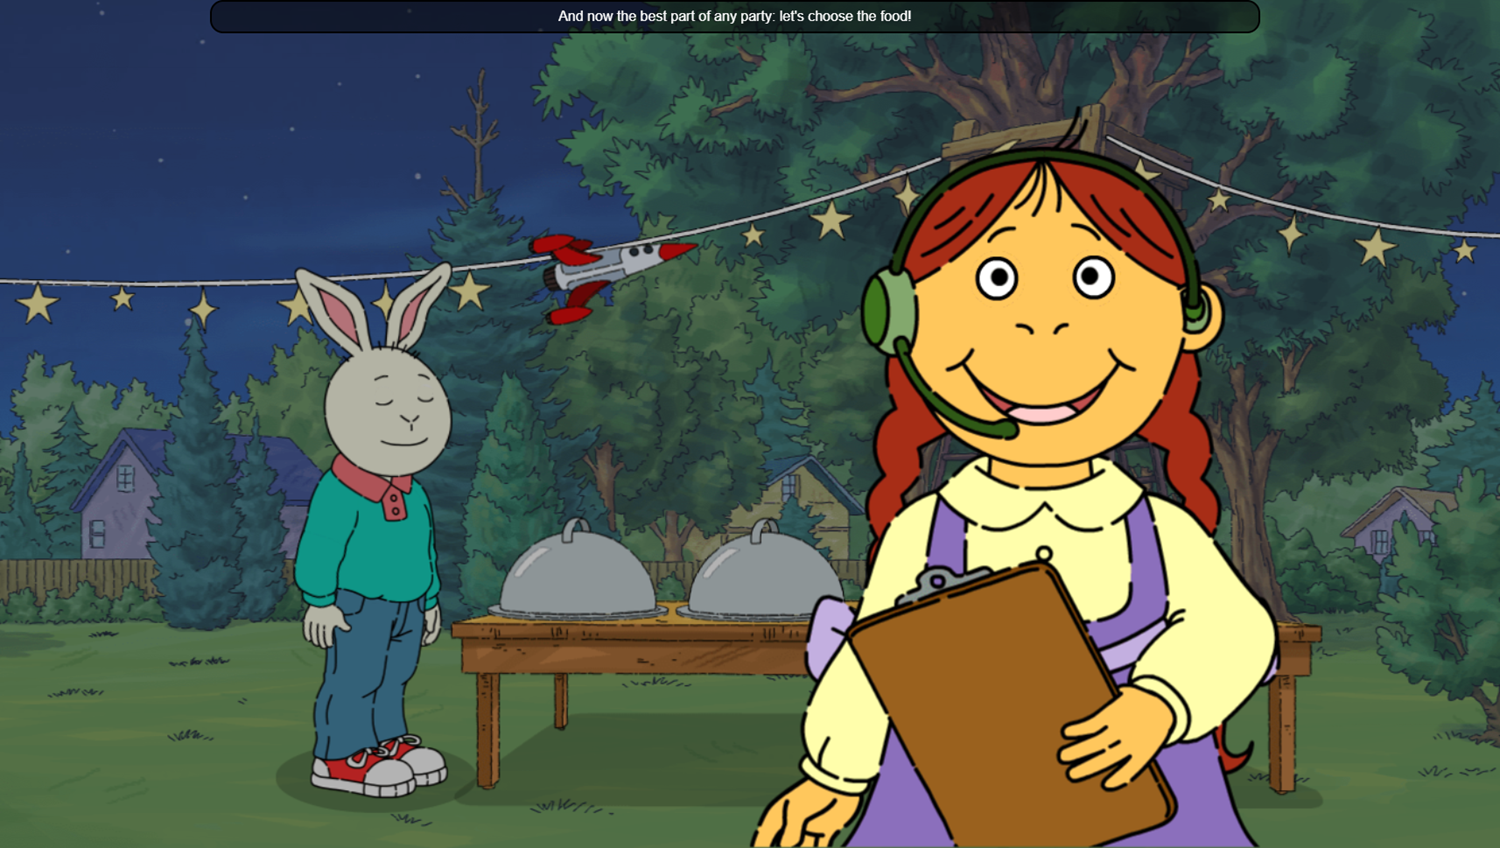 Arthur Muffy's Party Planner Game Choose Food Screenshot.